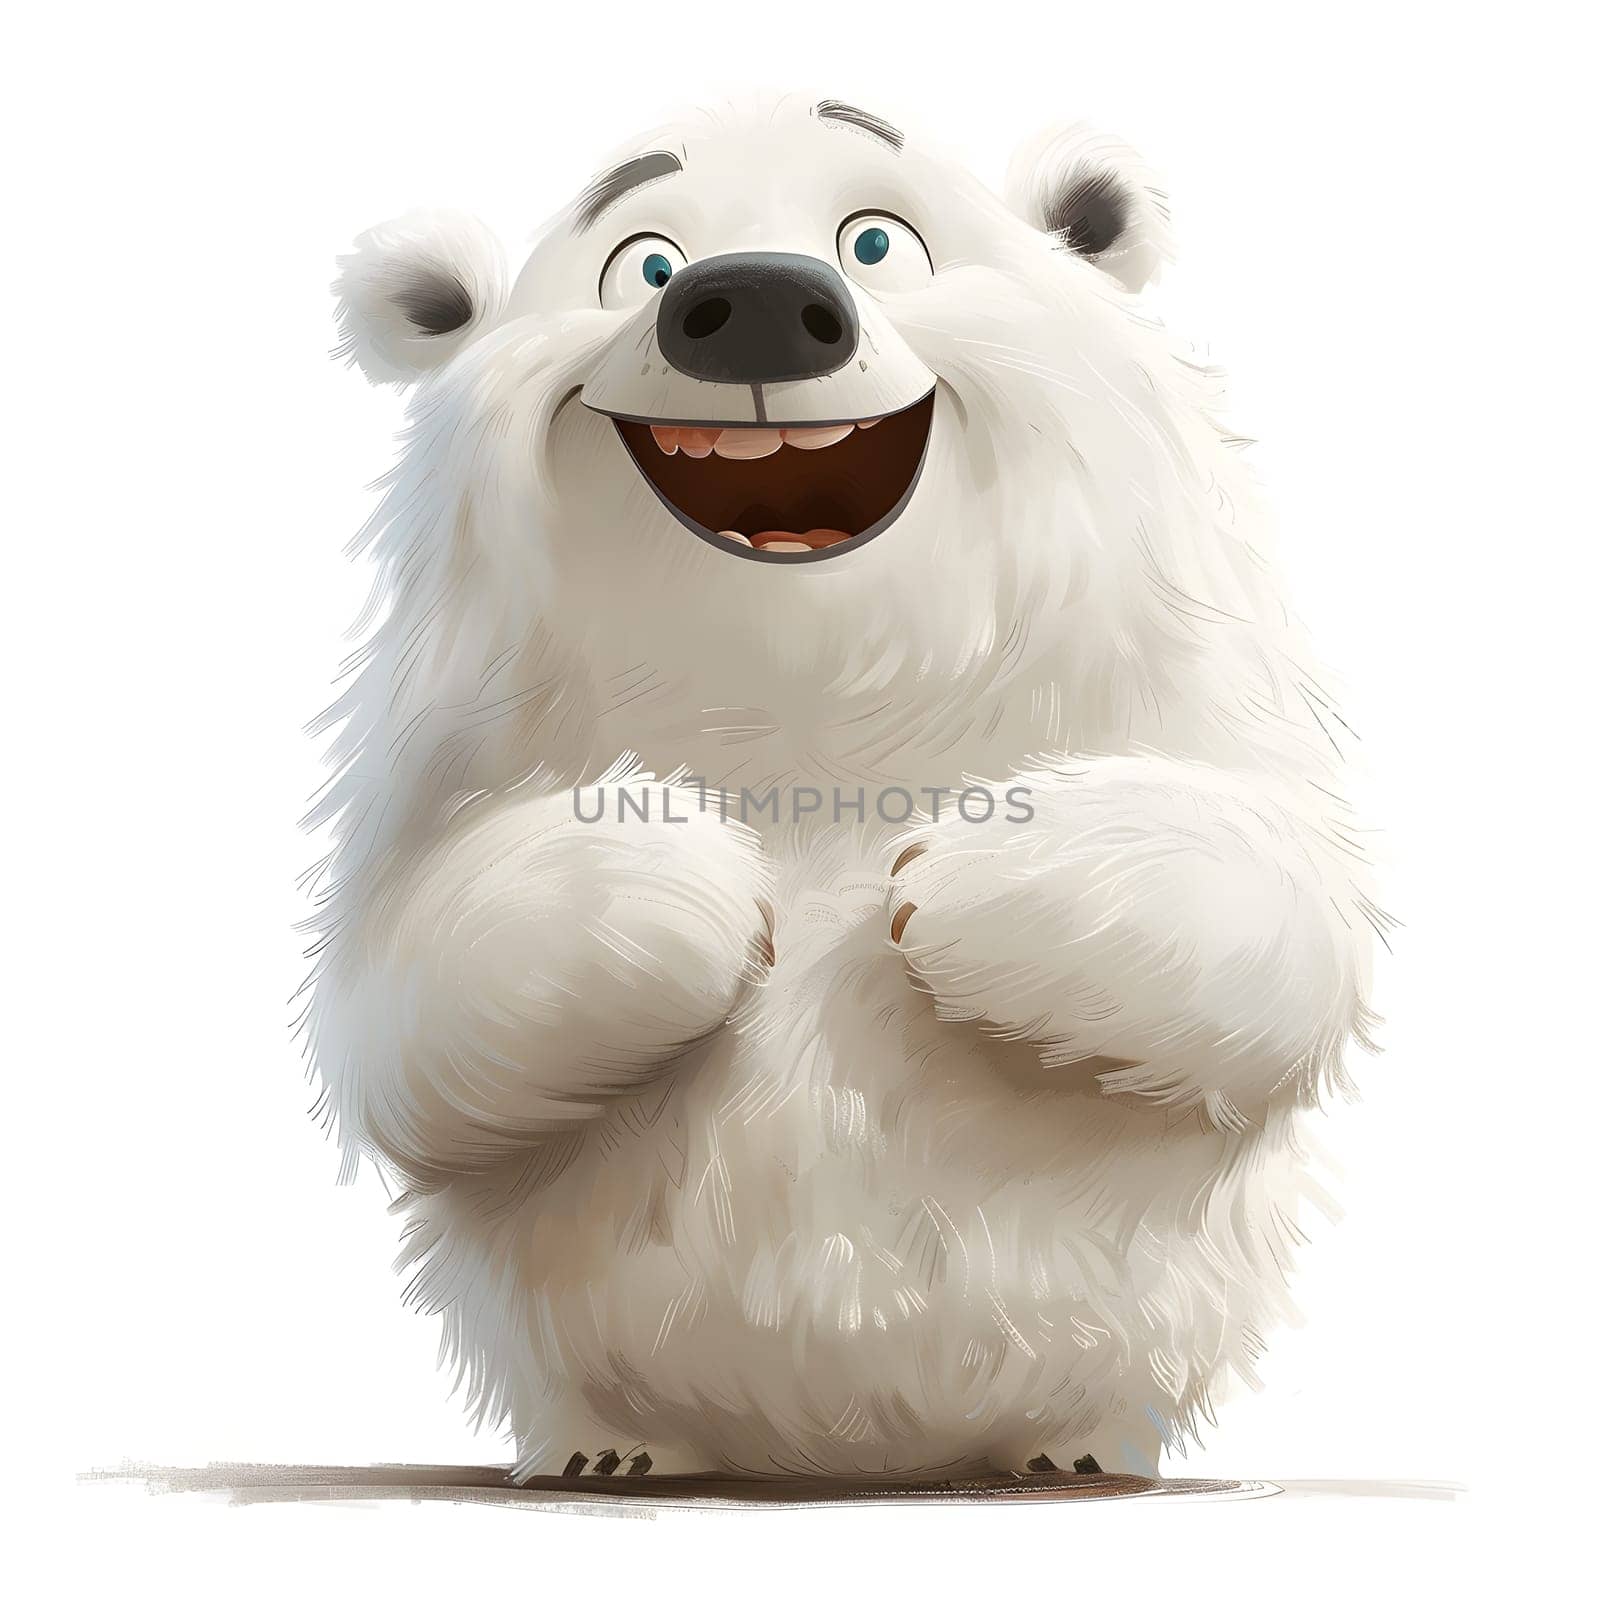 A happy polar bear plush toy, with fur and snout, standing on its hind legs. This terrestrial animal figure looks cute and cuddly